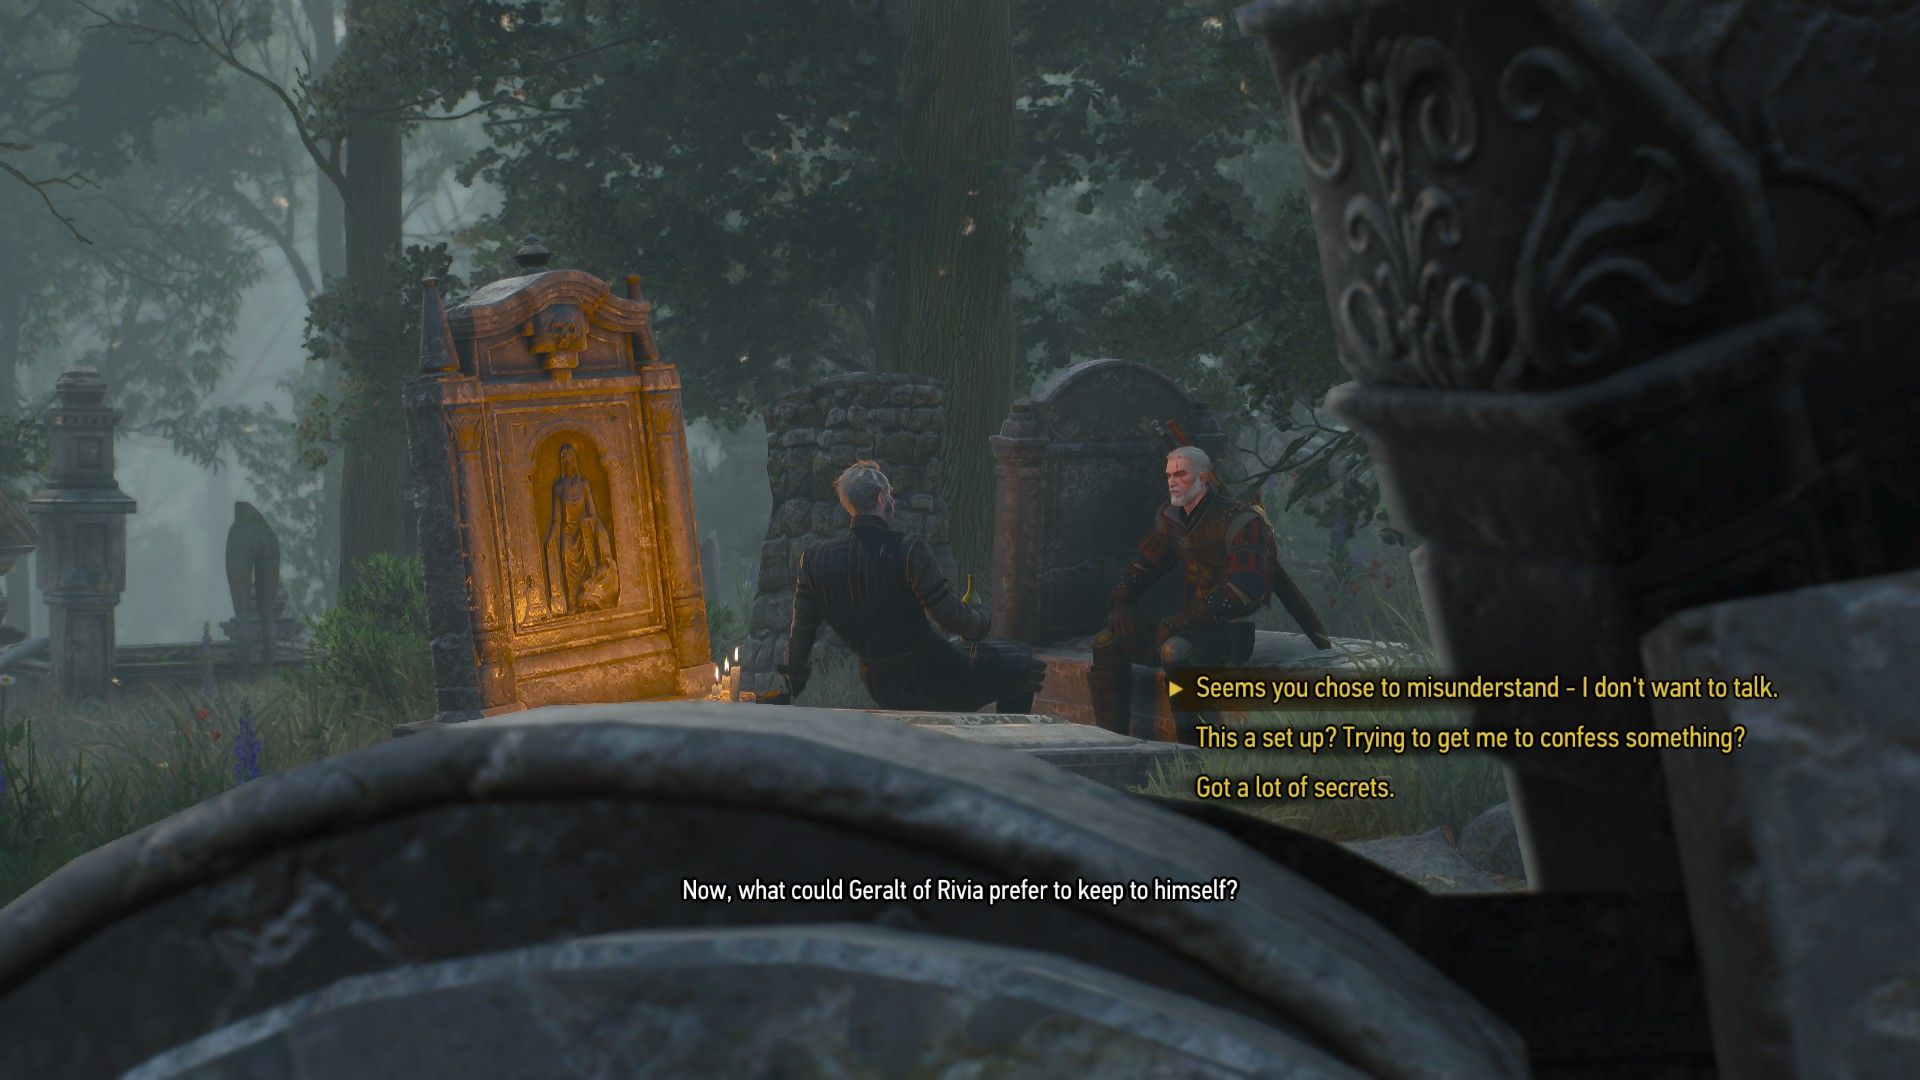 Screenshot of Geralt and Regis talking in a graveyard with dialogue options visible.